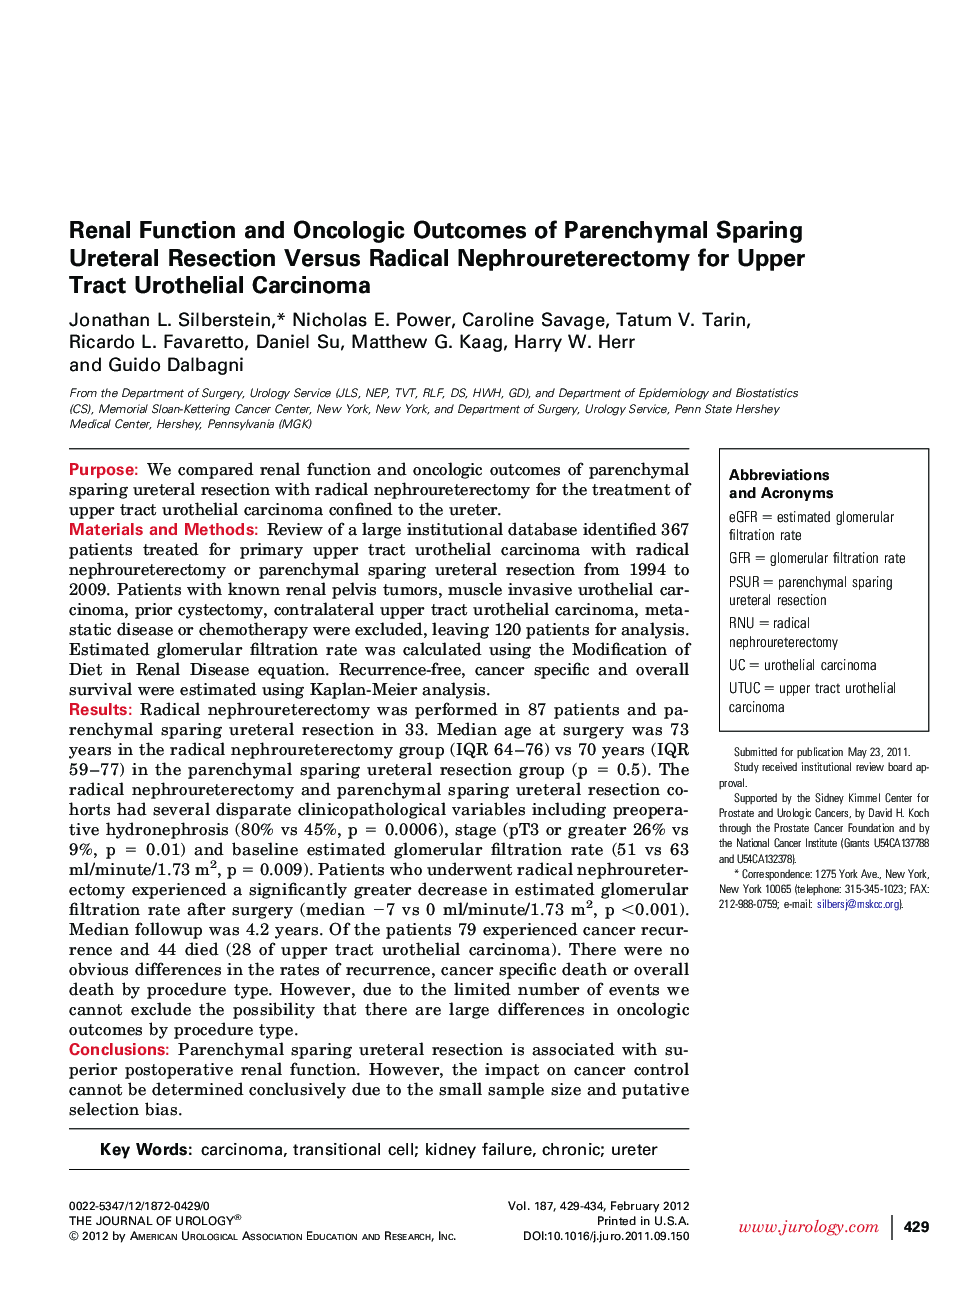 Renal Function and Oncologic Outcomes of Parenchymal Sparing Ureteral Resection Versus Radical Nephroureterectomy for Upper Tract Urothelial Carcinoma